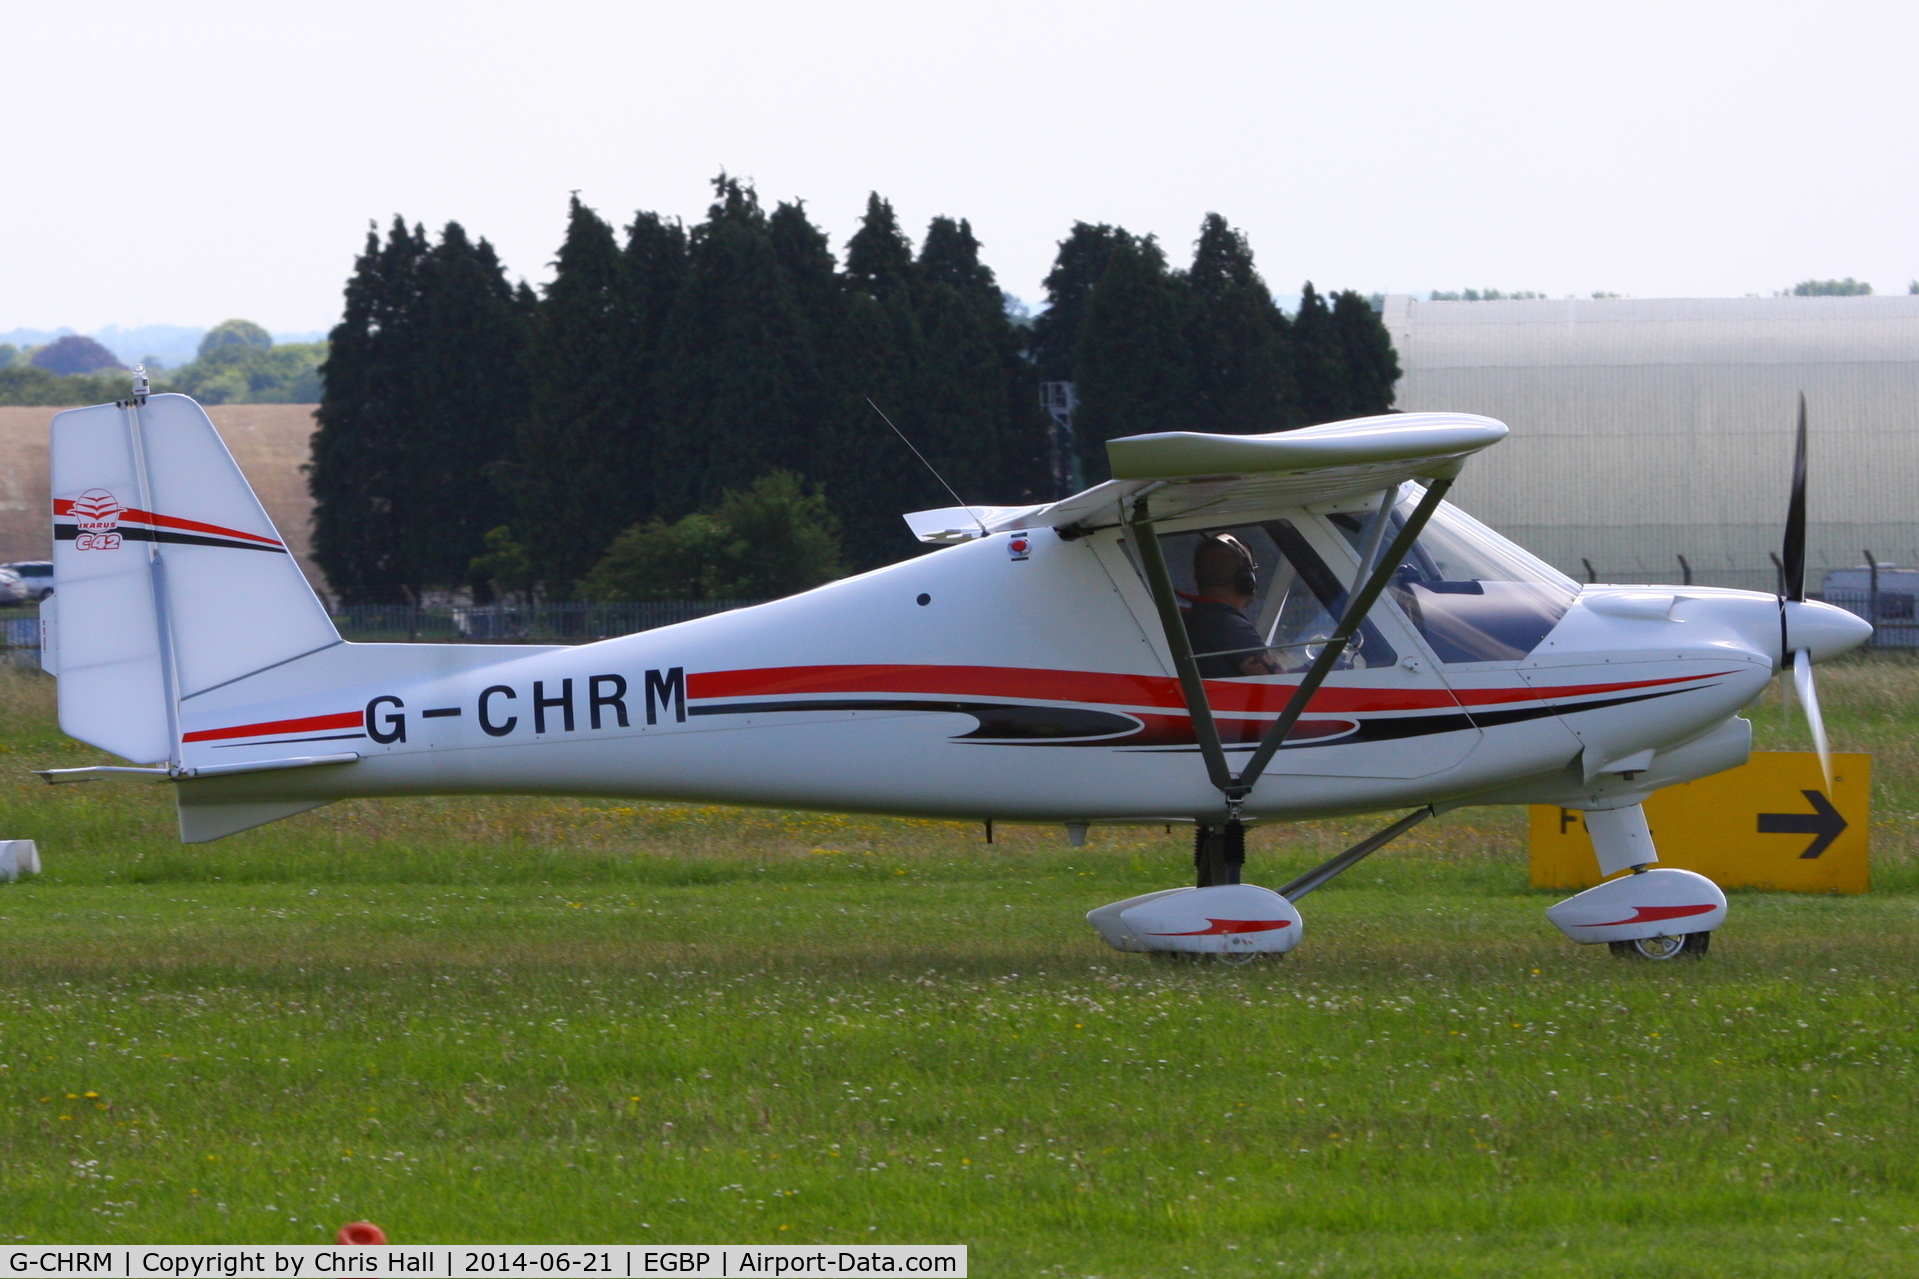 G-CHRM, 2012 Comco Ikarus C42 FB80 Bravo C/N 1210-7229, privately owned